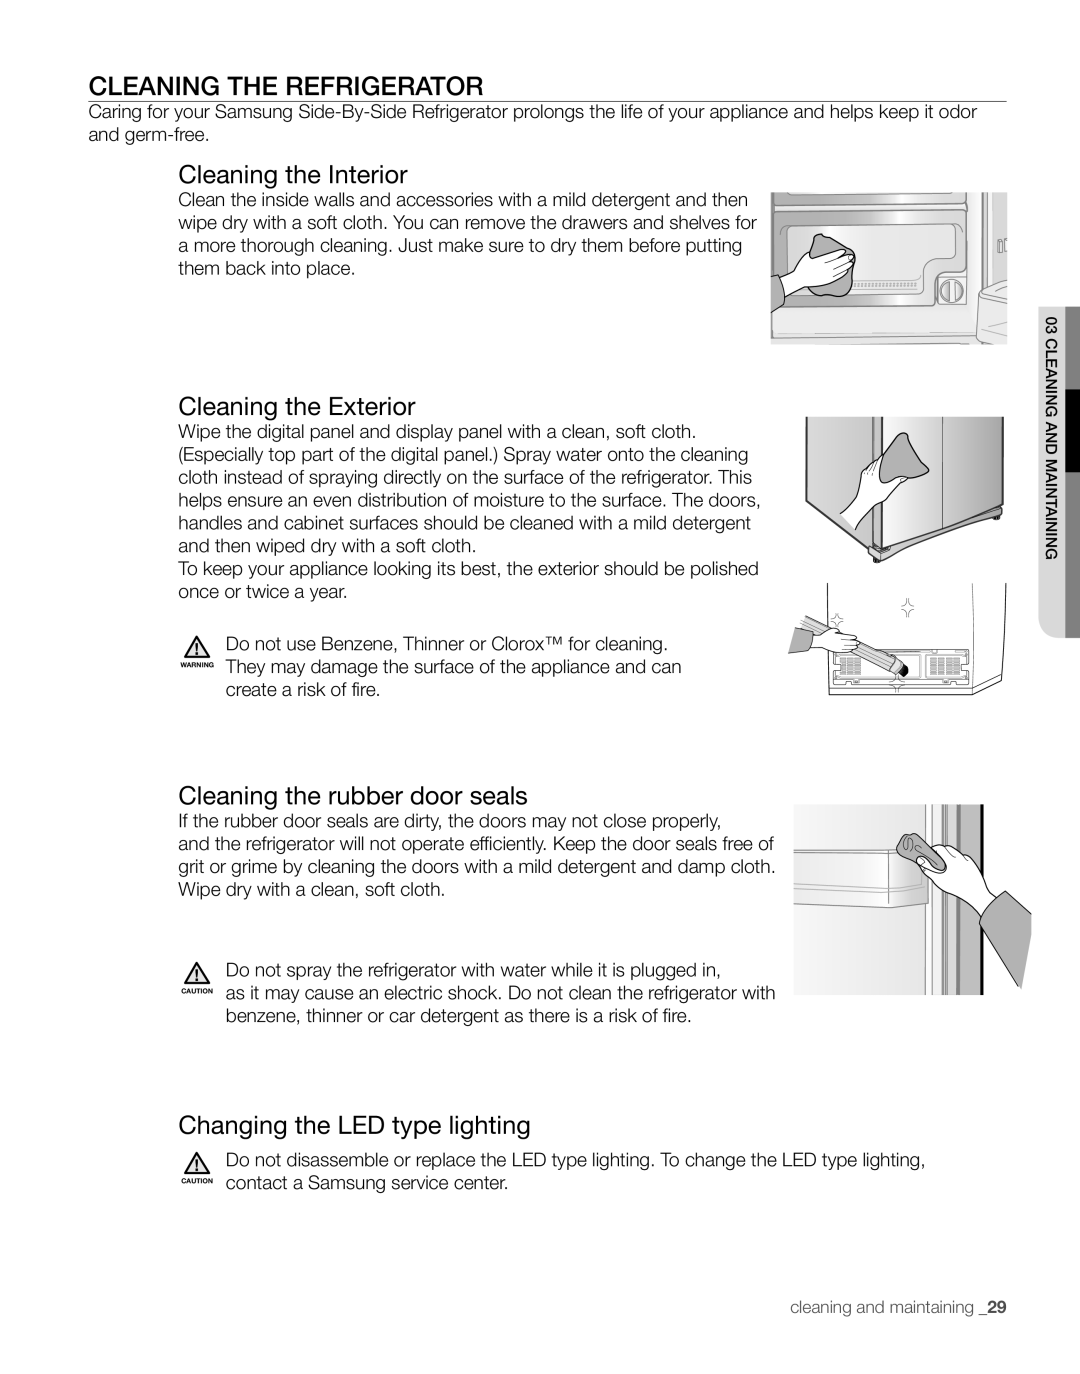 Samsung RS267TD Cleaning The Refrigerator, Cleaning the Interior, Cleaning the Exterior, Cleaning the rubber door seals 